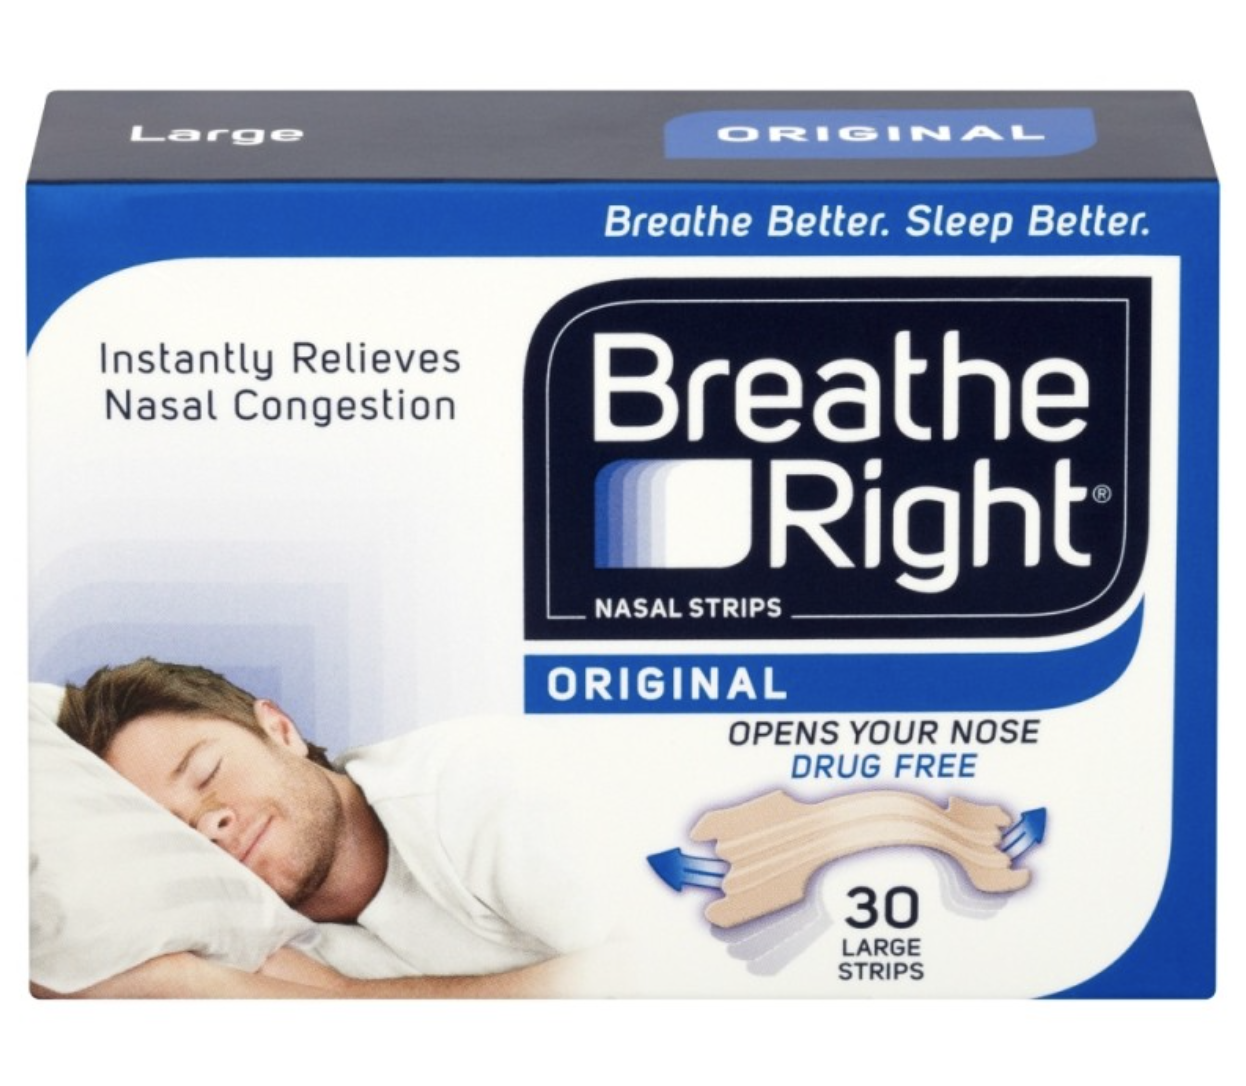 Breathe Right Congestion Relief Nasal Strips Original Large